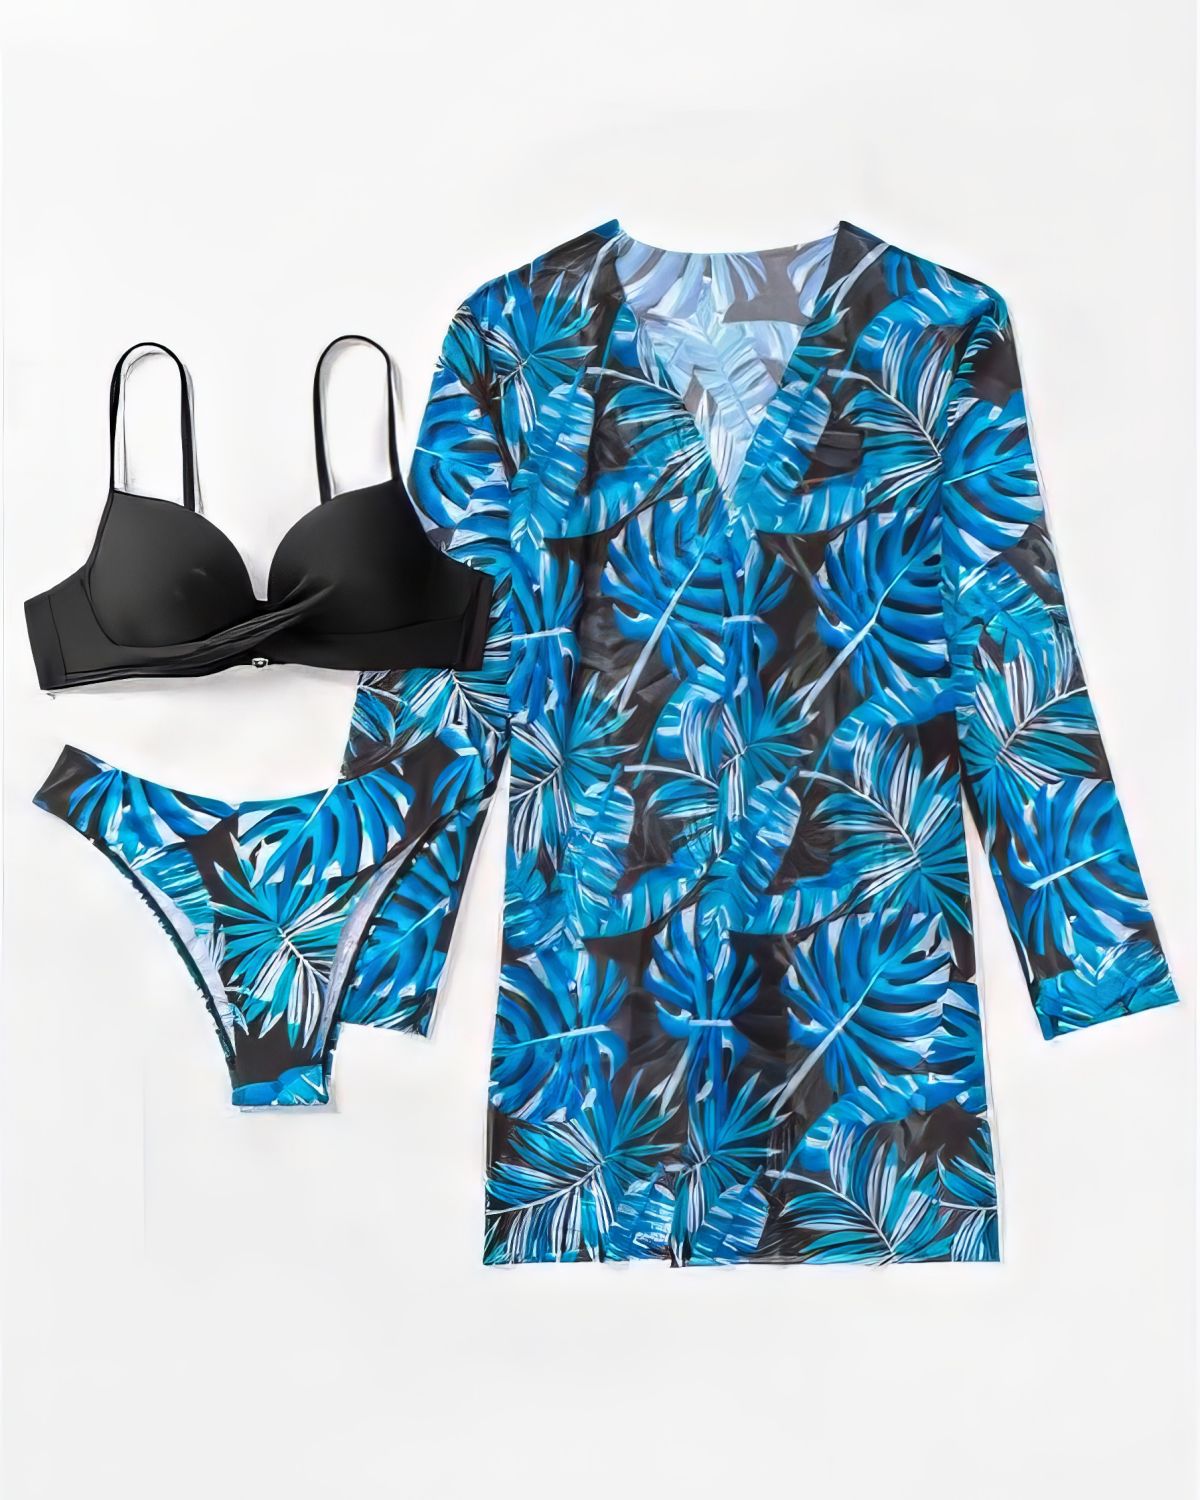 Blue-Floral-Print-Low-Waist-With-Cover-Up-Three-Pieces-Bikini-Set